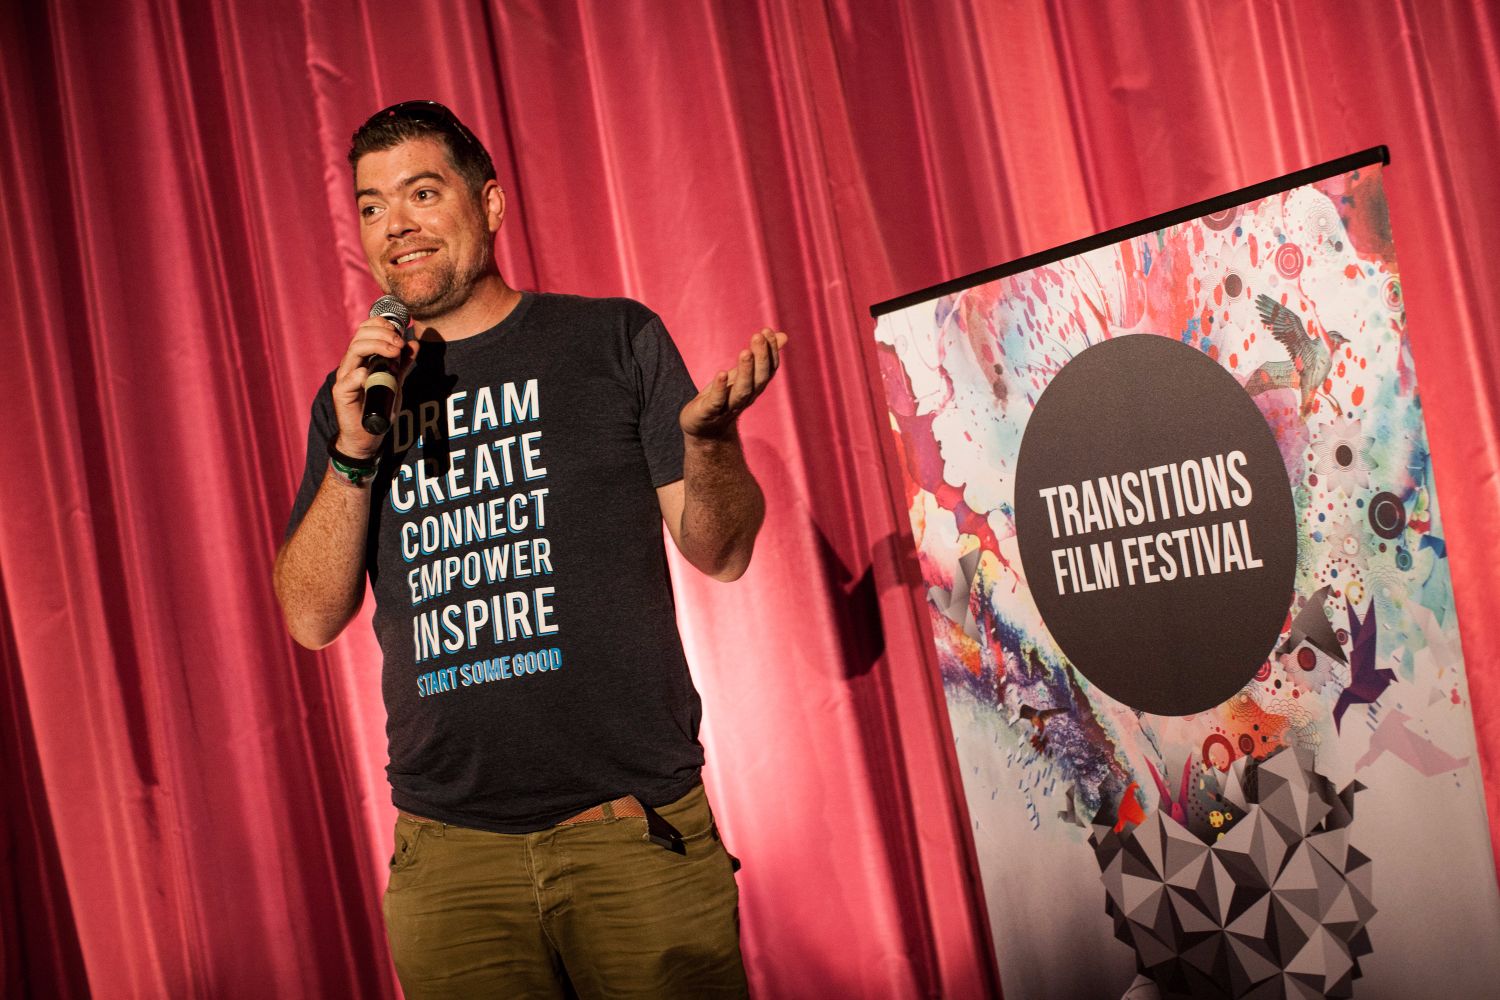 Speaking at Transitions FF.jpg